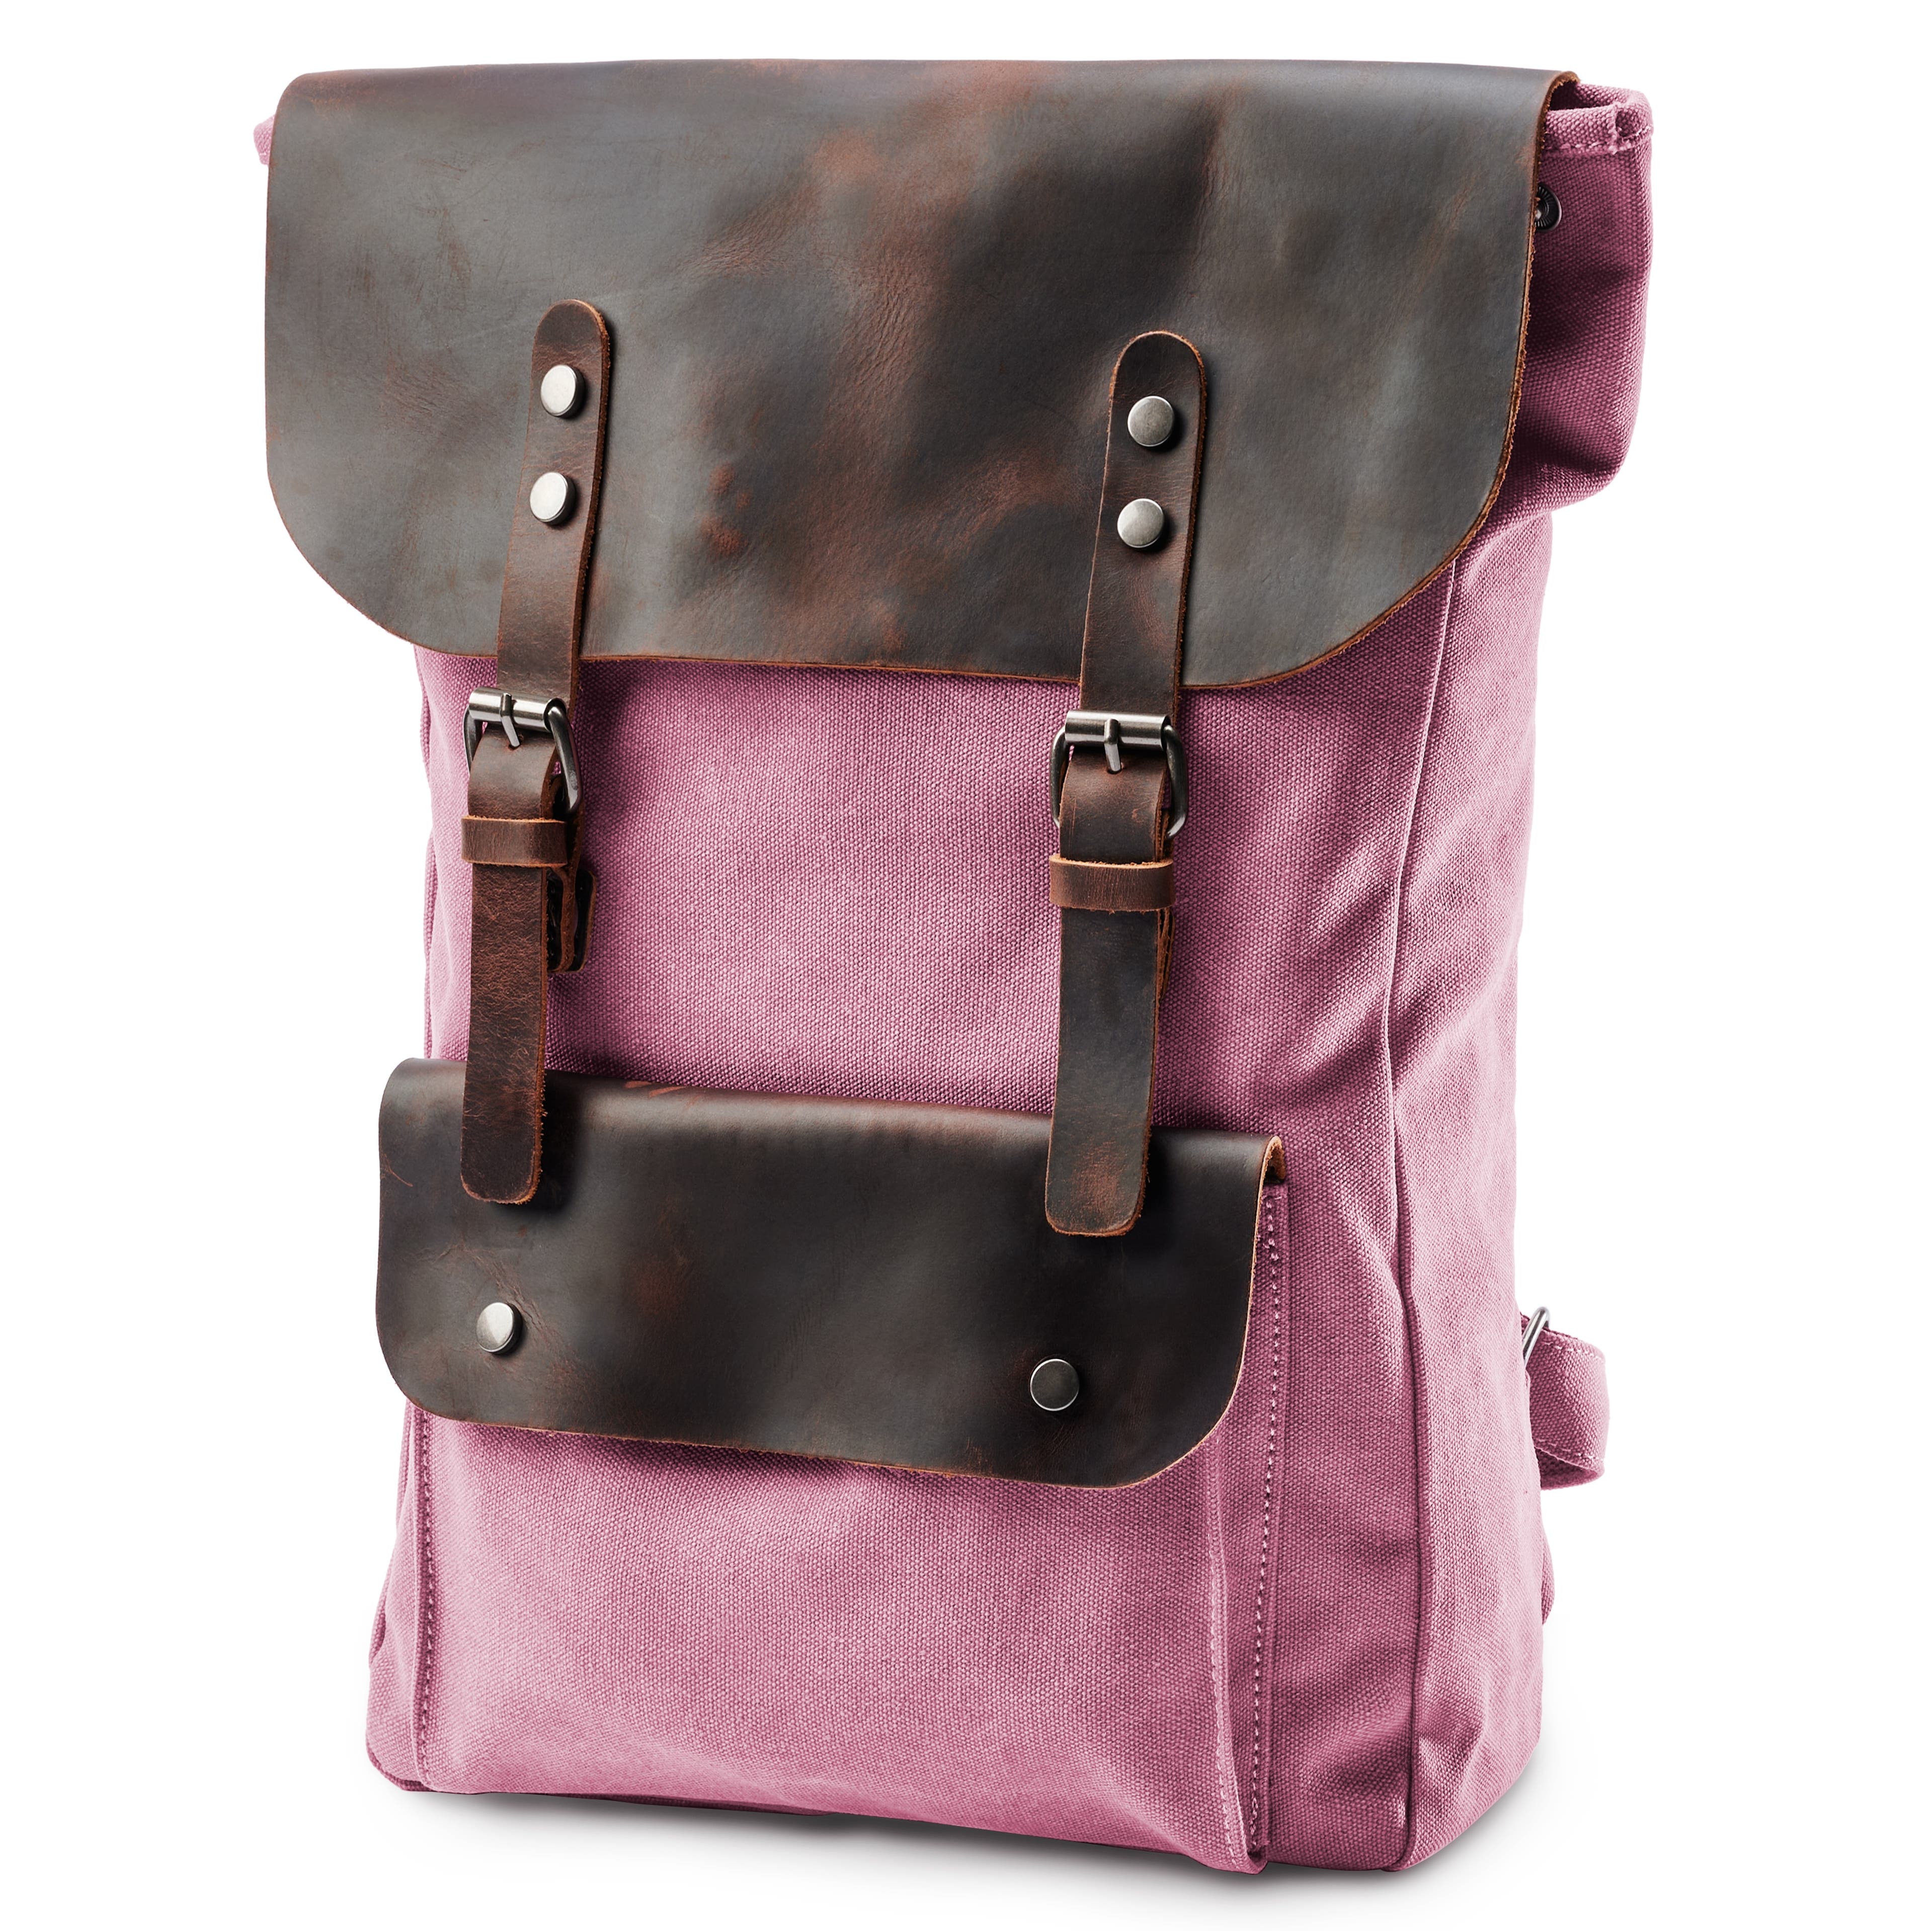 Vintage-Style Pink Leather & Canvas Backpack